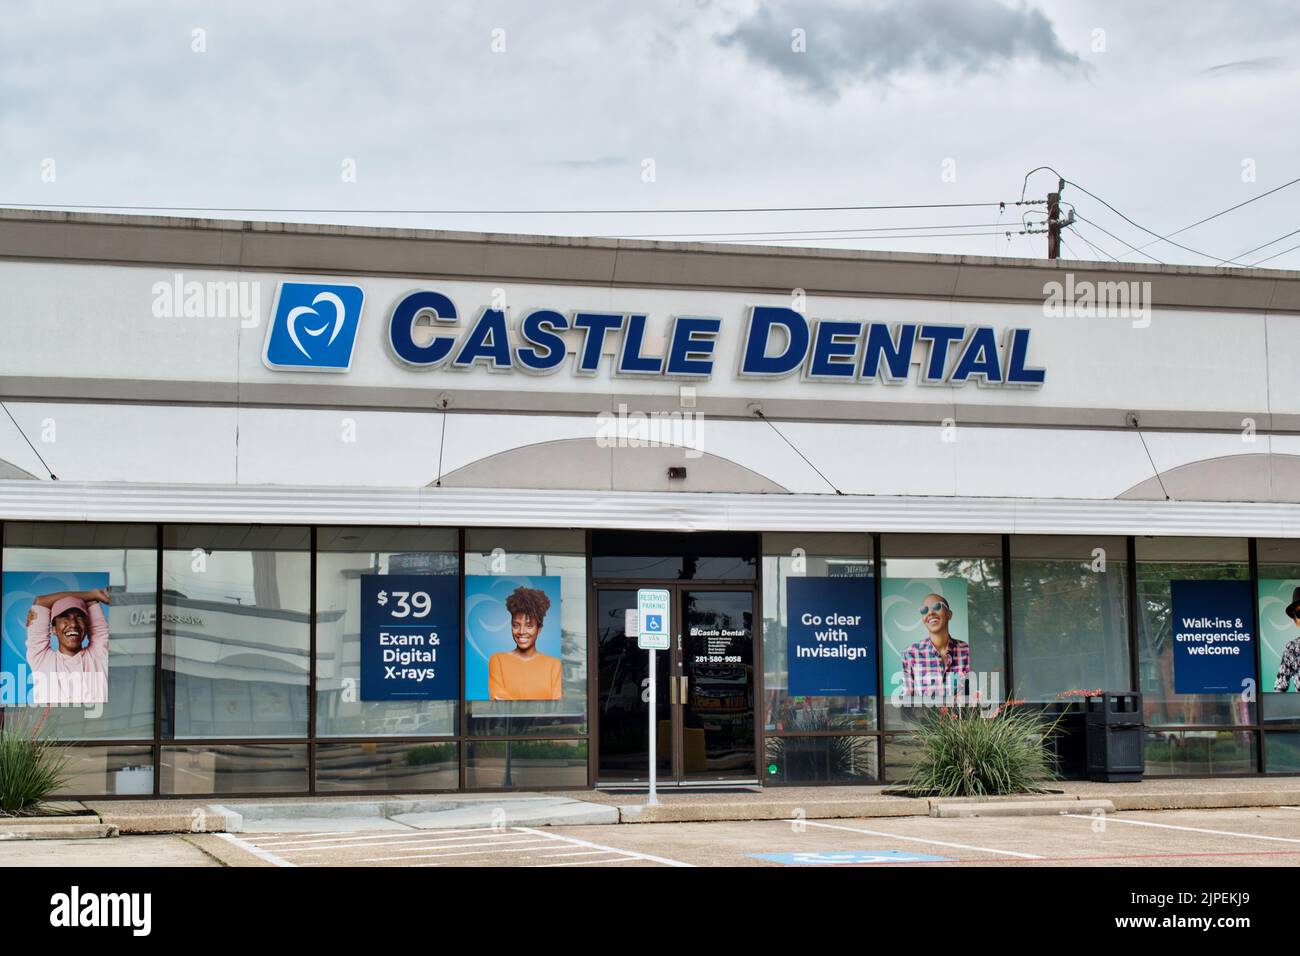 Houston, Texas USA 12-05-2021: Castle Dental office building exterior in Houston, TX. Health and wellness local business. Stock Photo